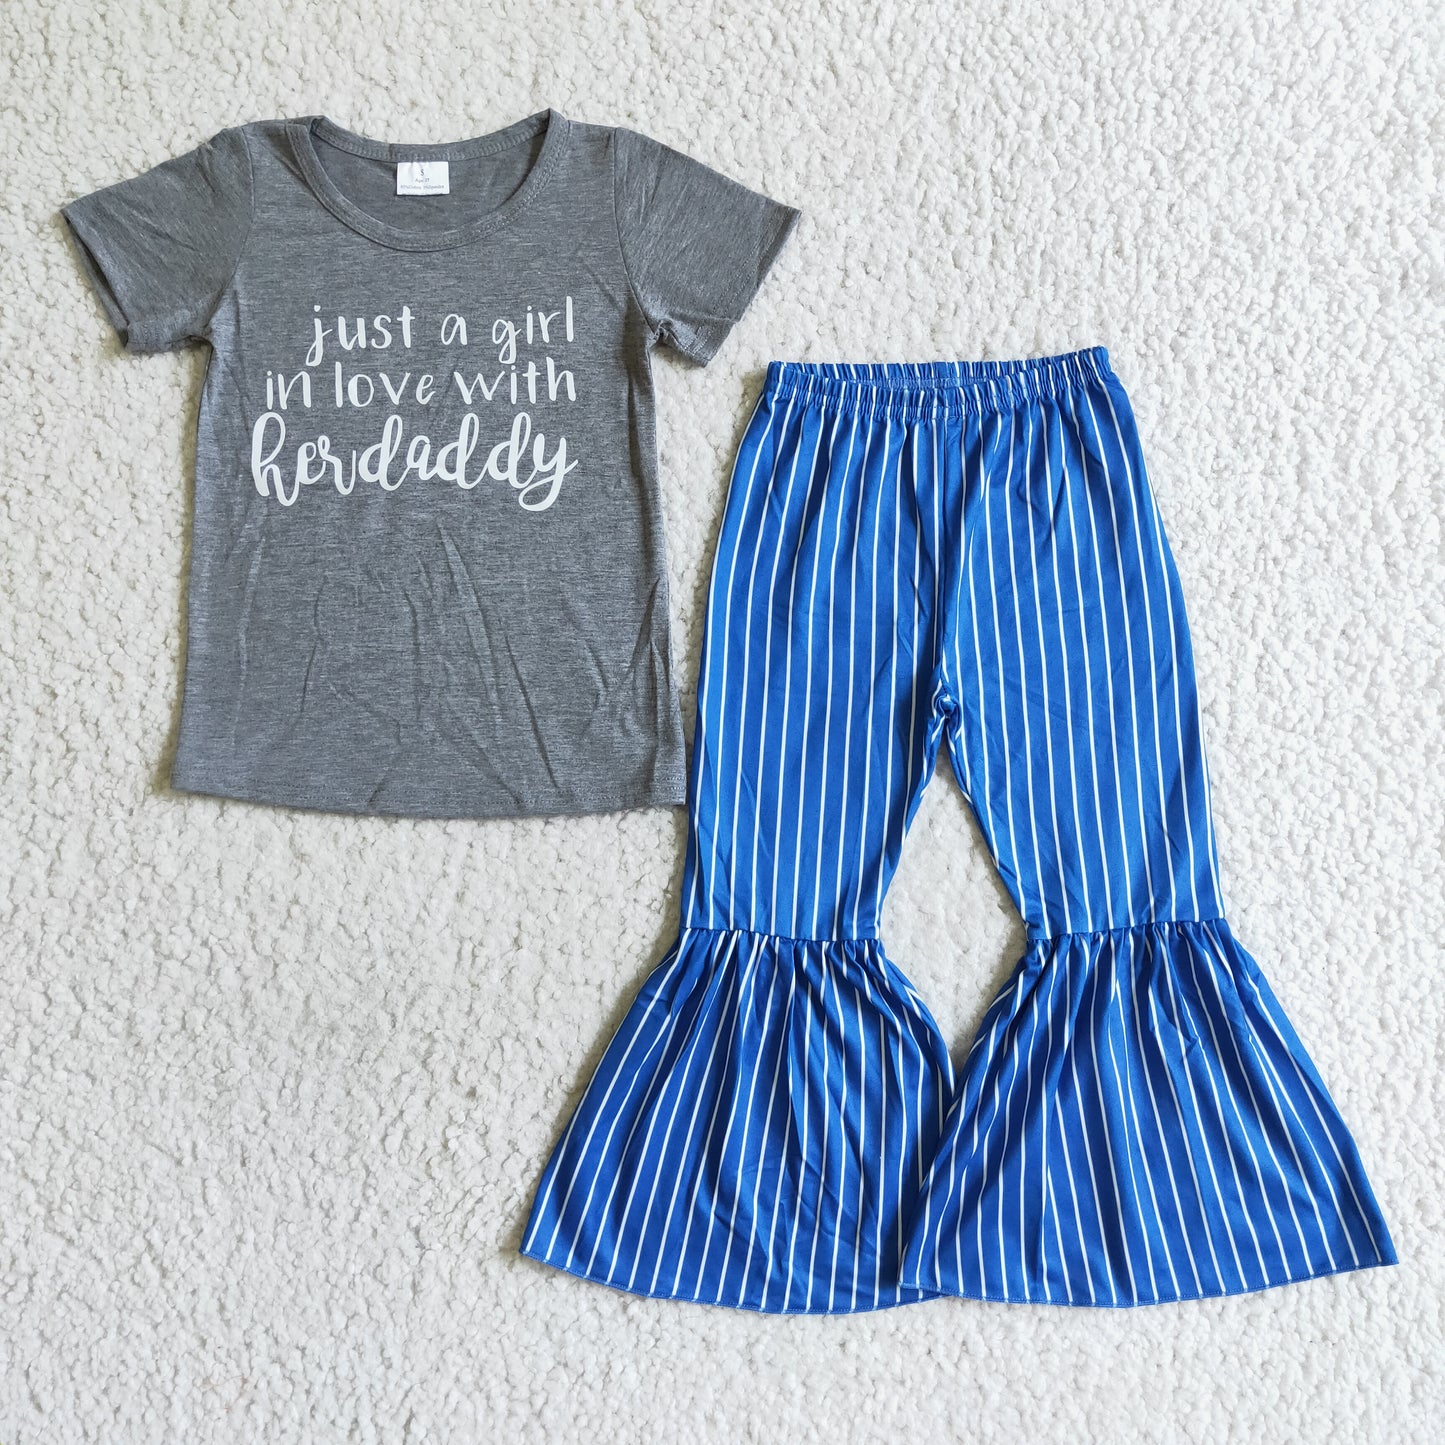 Just a girl in love with her daddy stripe pants set